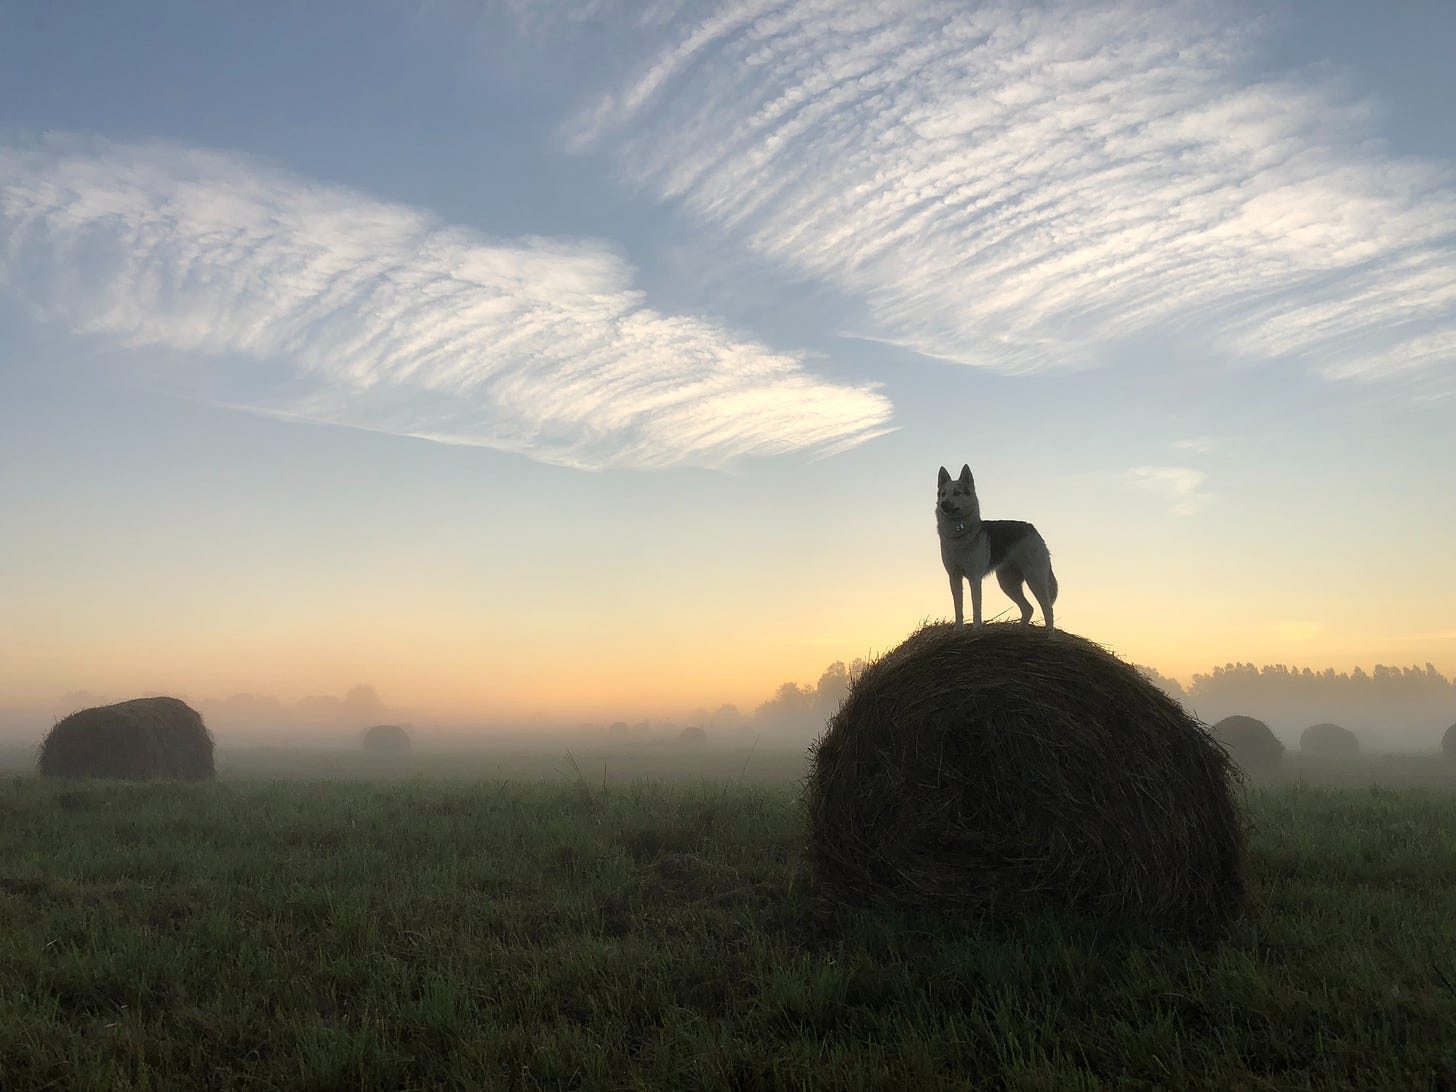 Photograph of a wolflike dog standing proudly atop a hay bale in a misty field at sunrise.